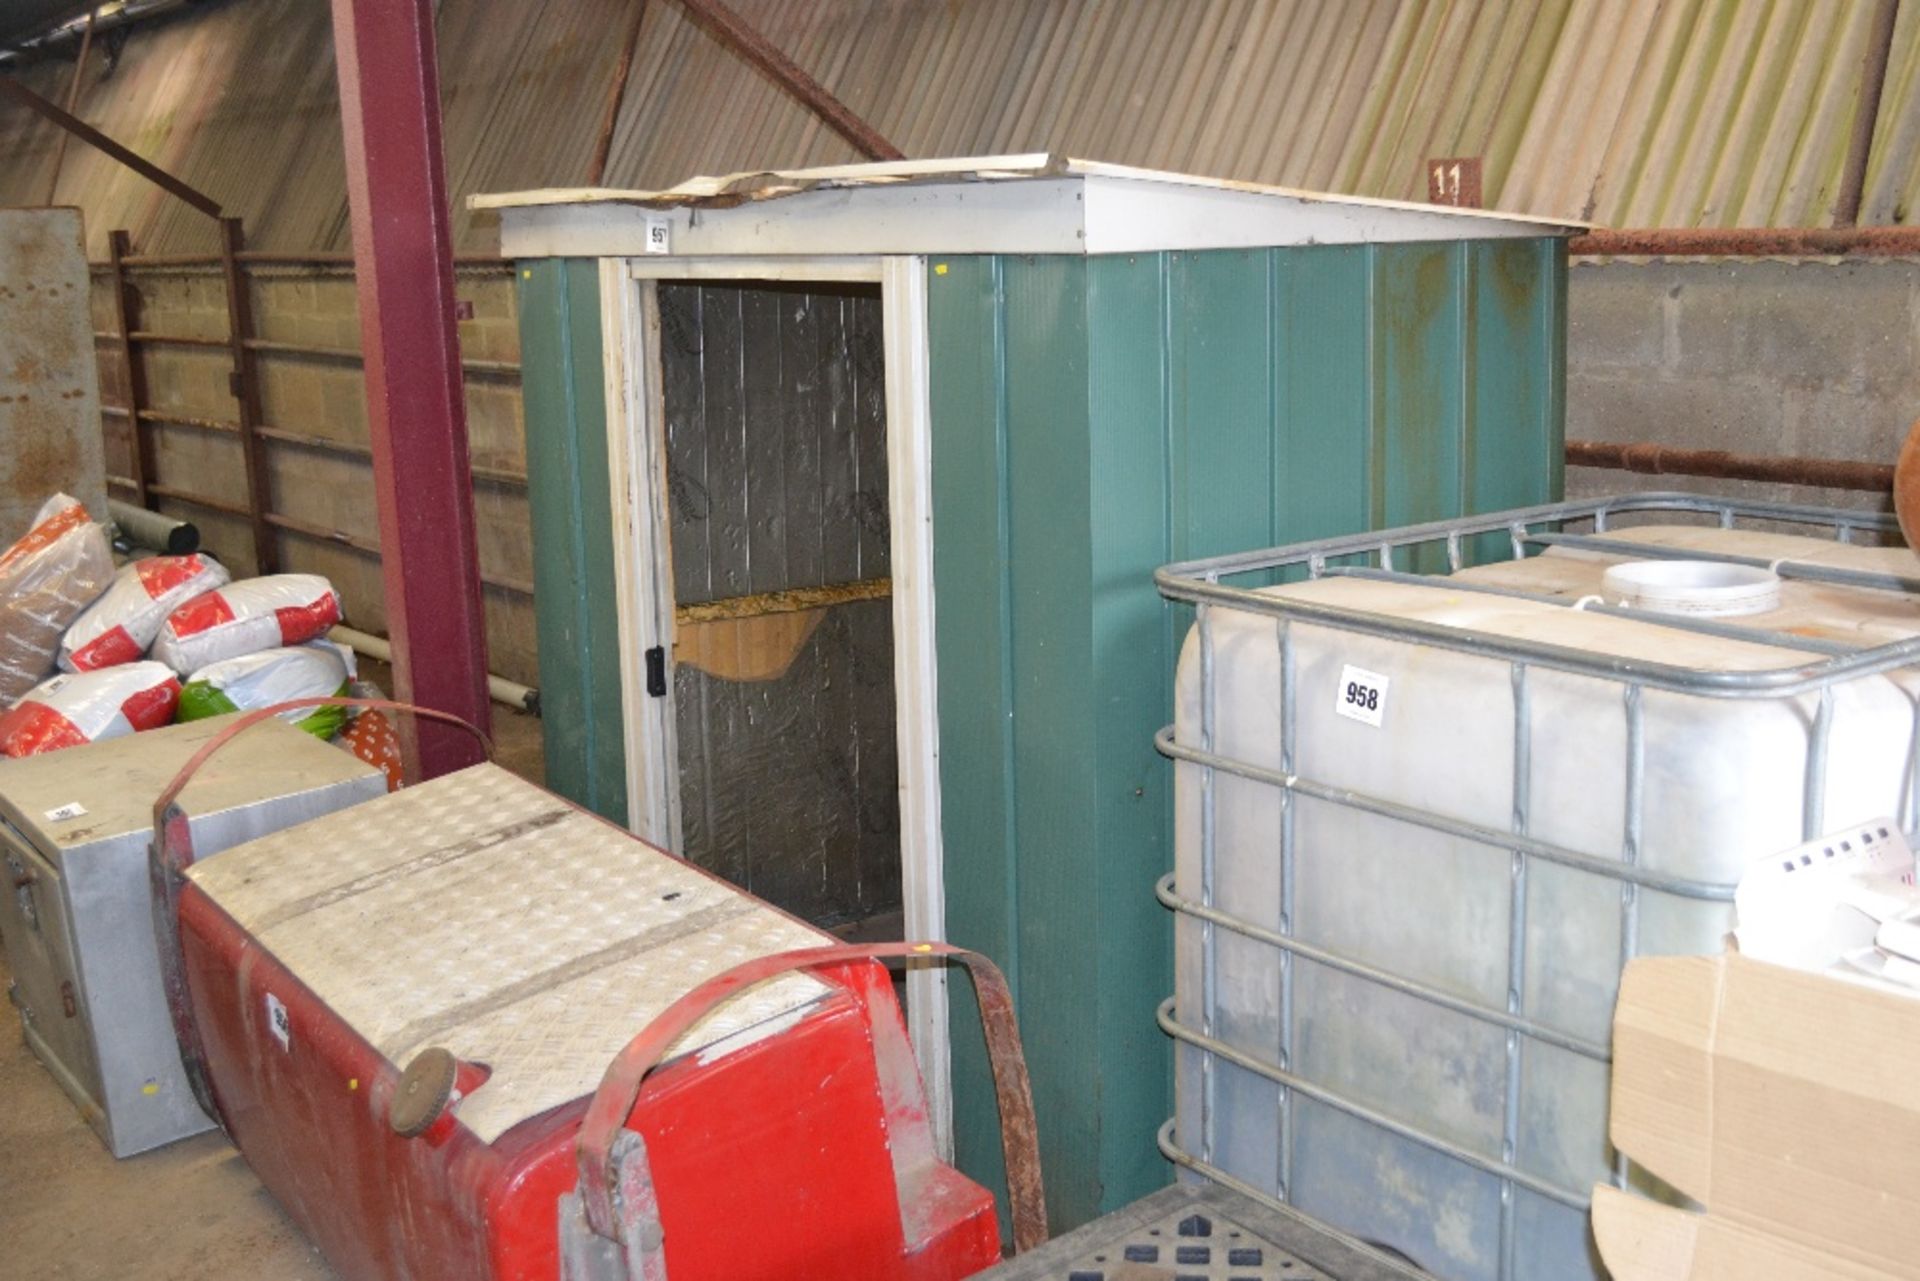 6ft x 4ft tin garden shed with sliding doors.